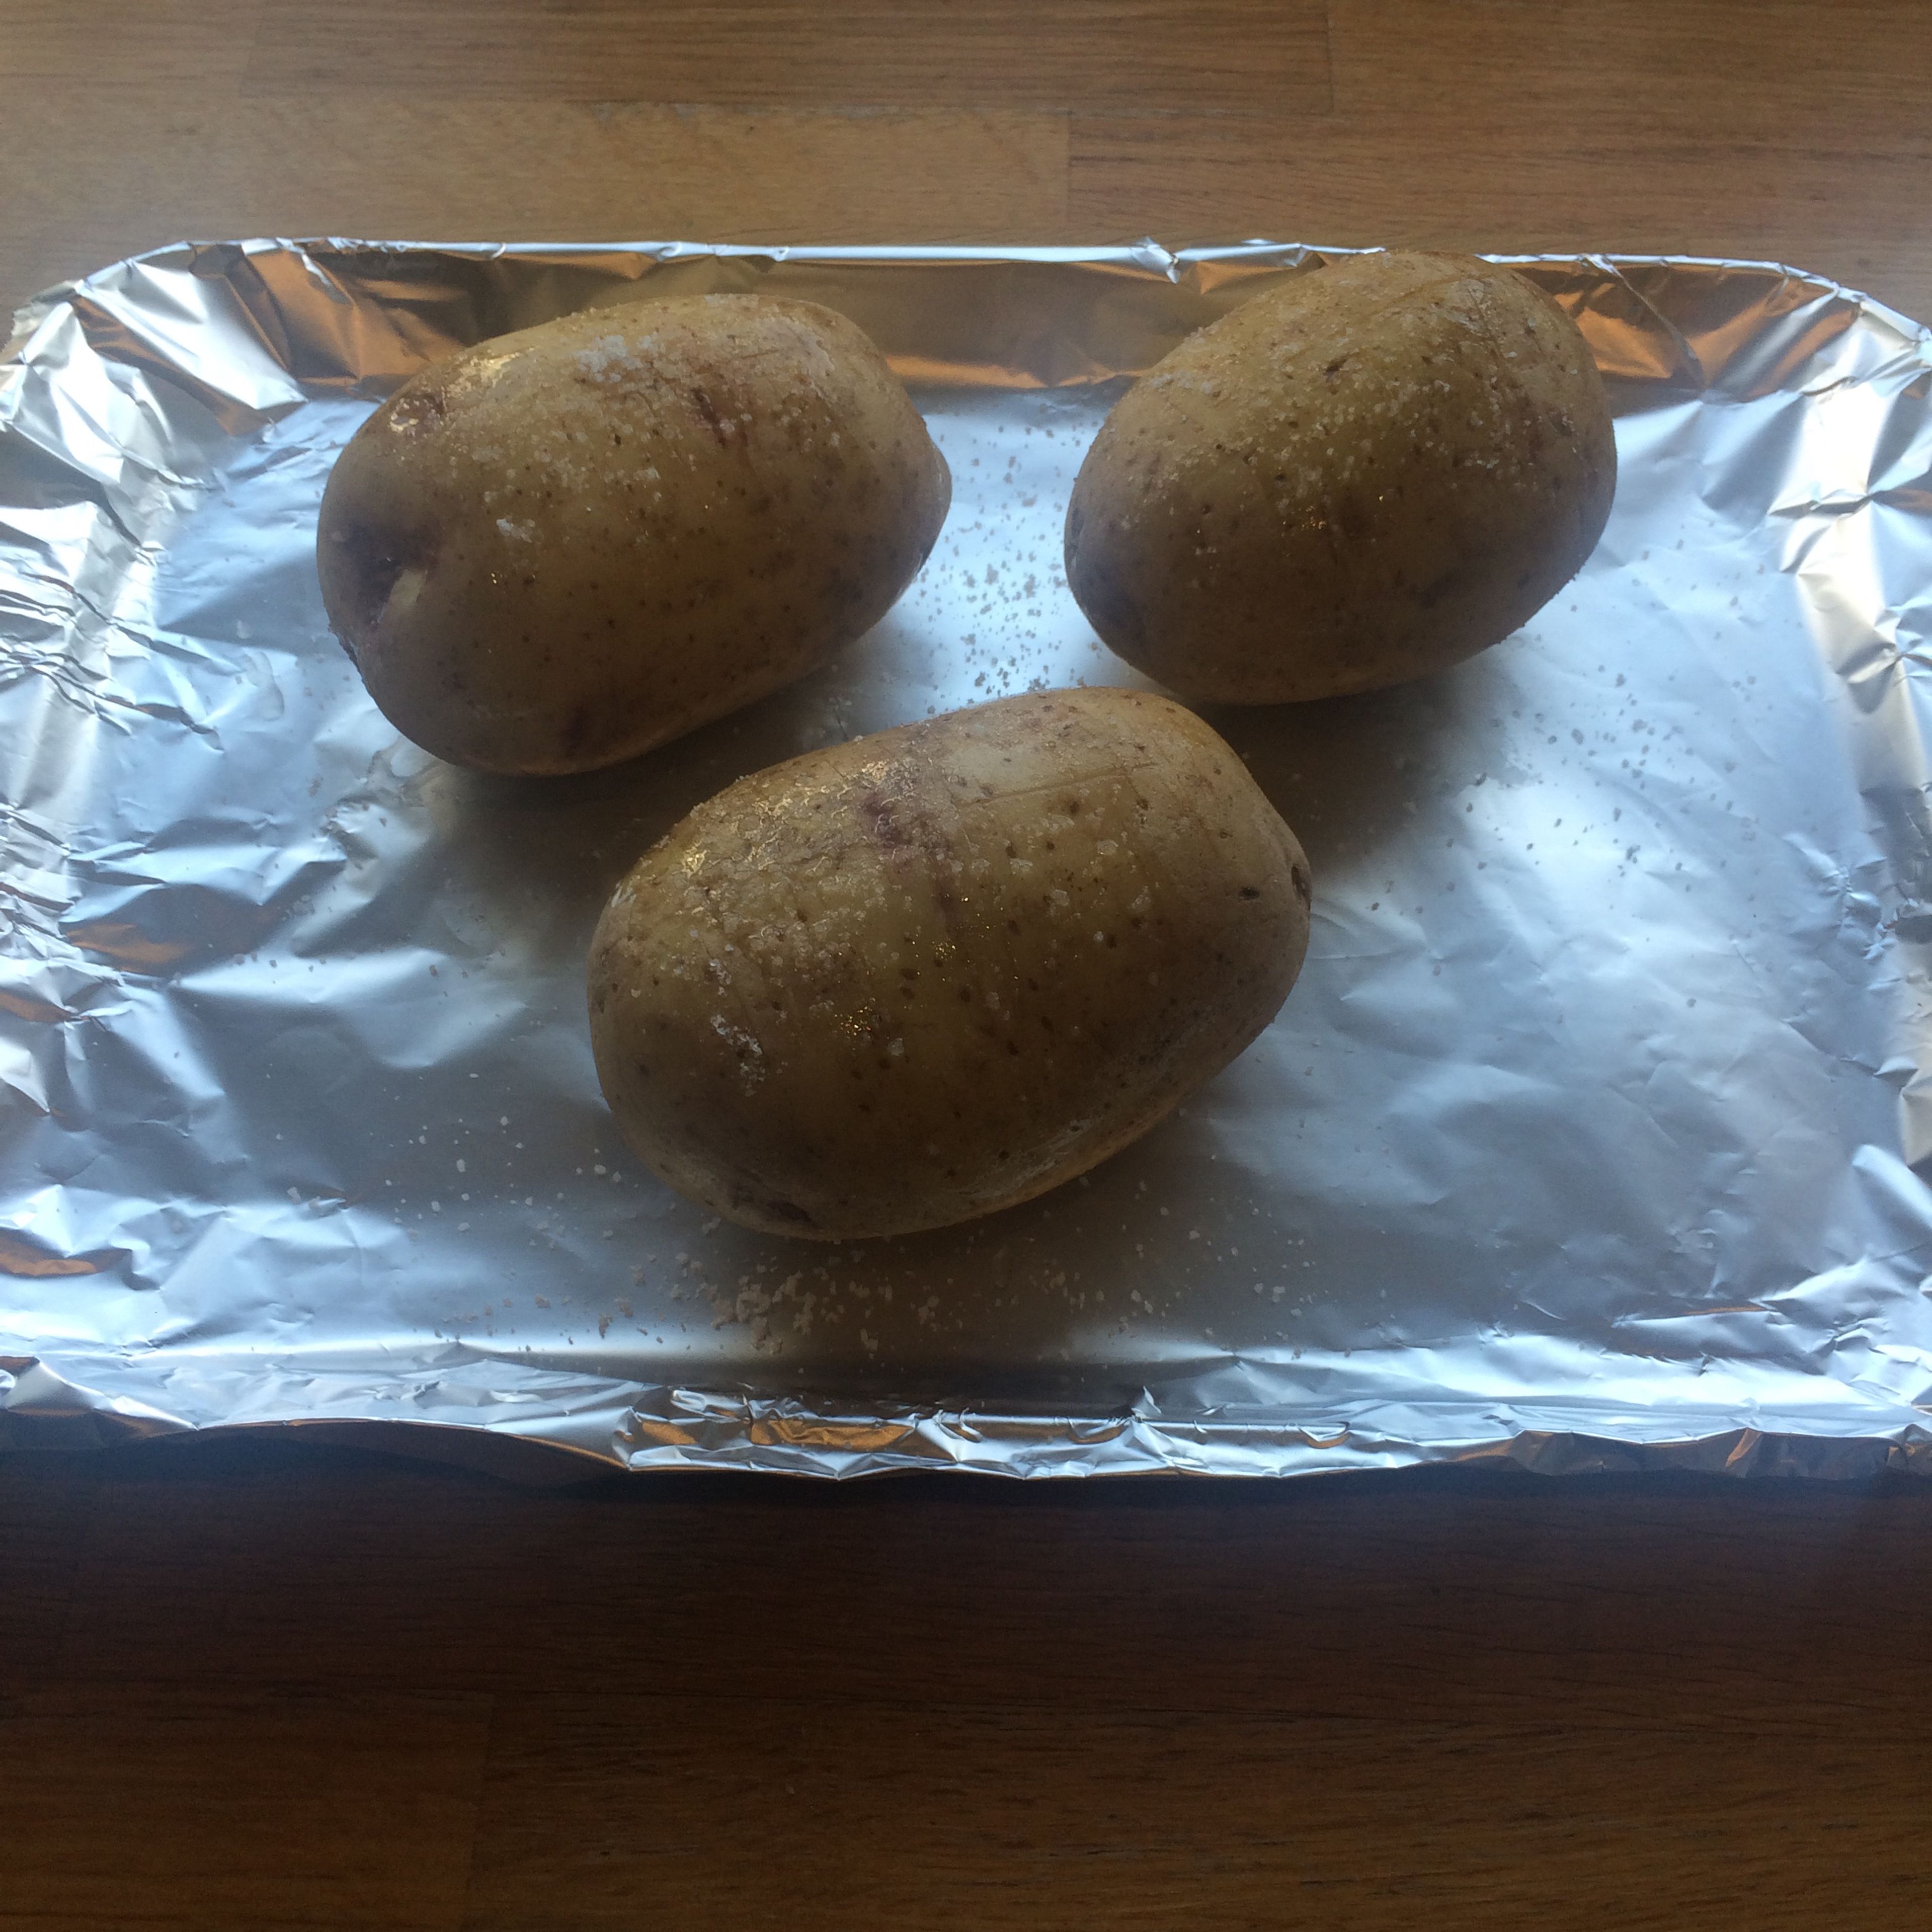 Preheat oven to 220°C and prepare potatoes by piercing all over with a butter knife and then score a cross on the top. Rub a teaspoon of oil onto each potato and grind over plenty of salt. Place in the oven and leave to cook for 1 hour